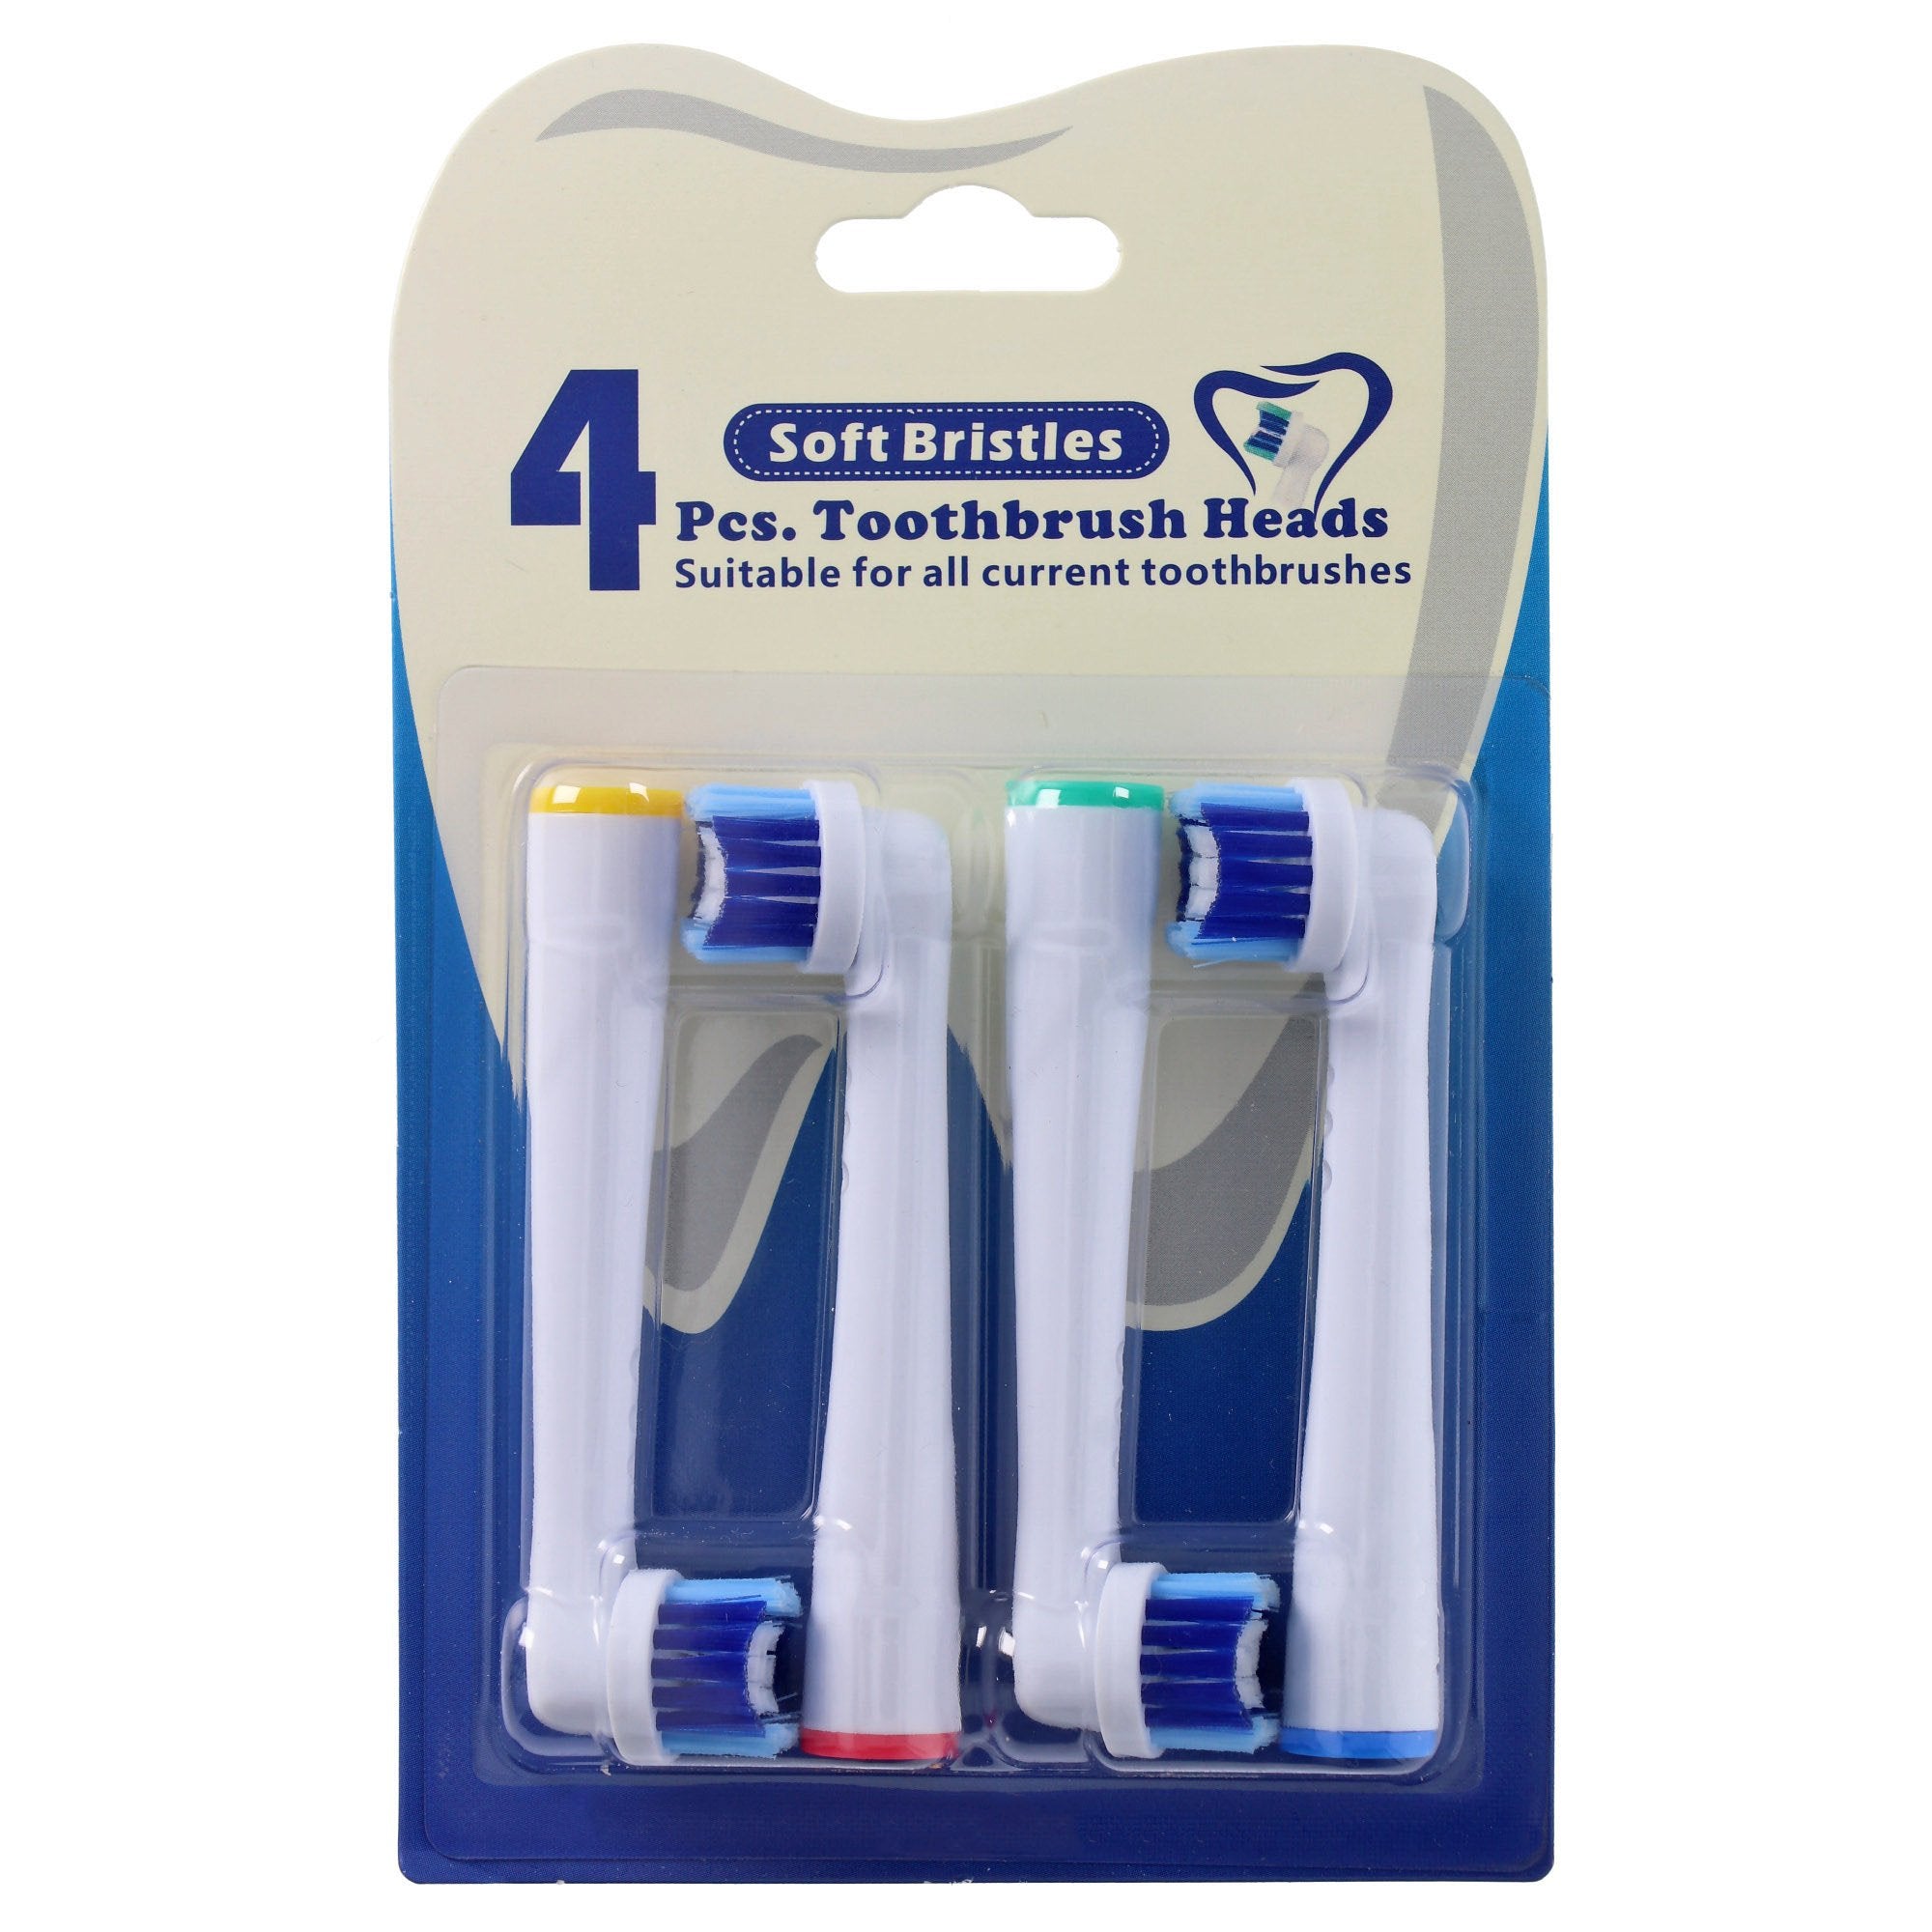 Pack of 4 Cleaning Brush V2 replacement toothbrush heads for electric toothbrushes from Oral-B, suit